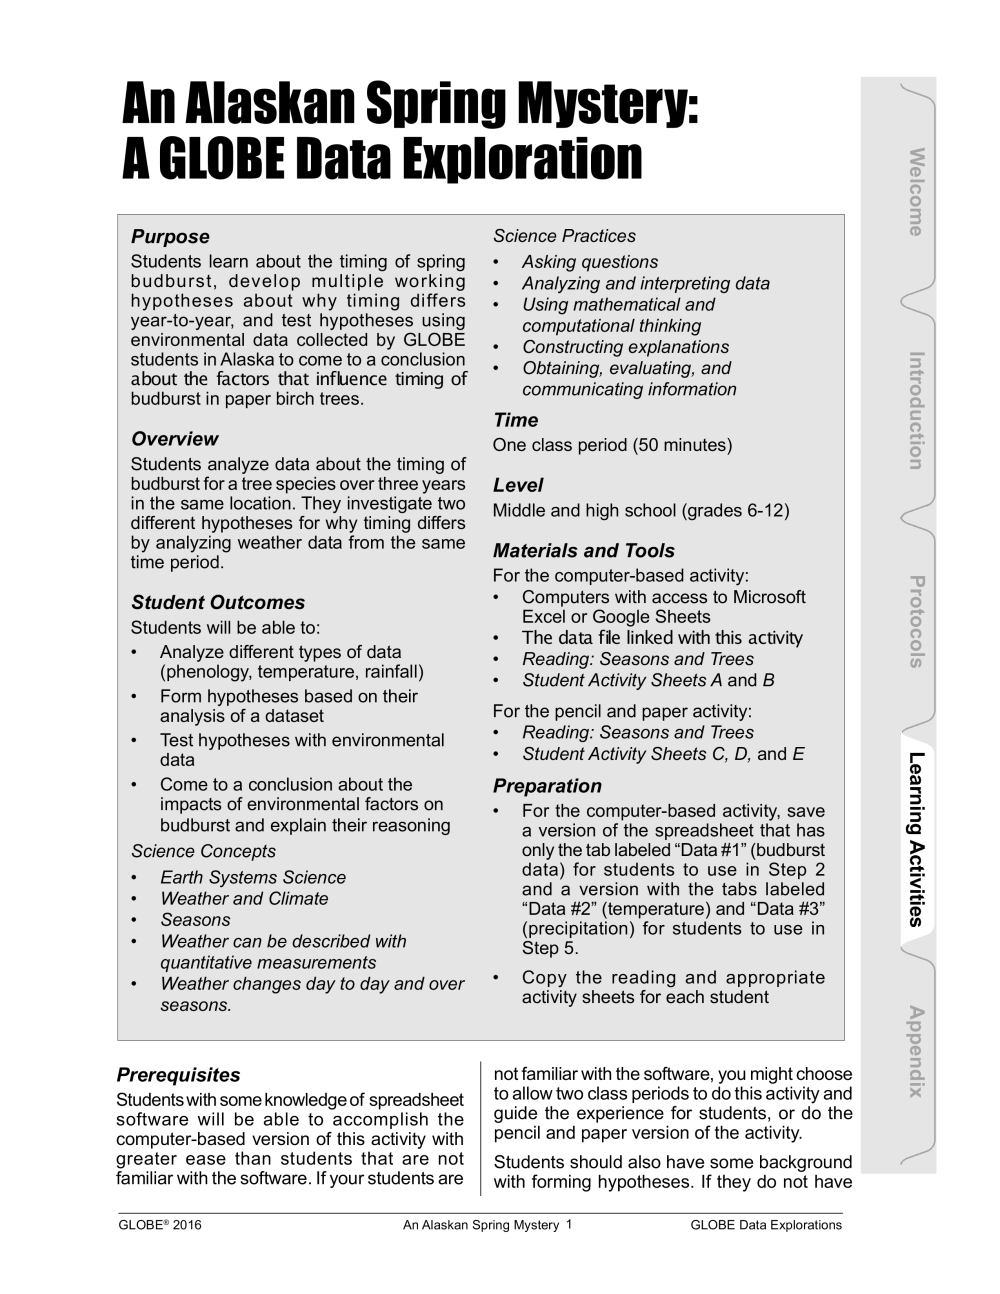 Learning Activities preview for An Alaskan Spring Mystery- A GLOBE Data Exploration